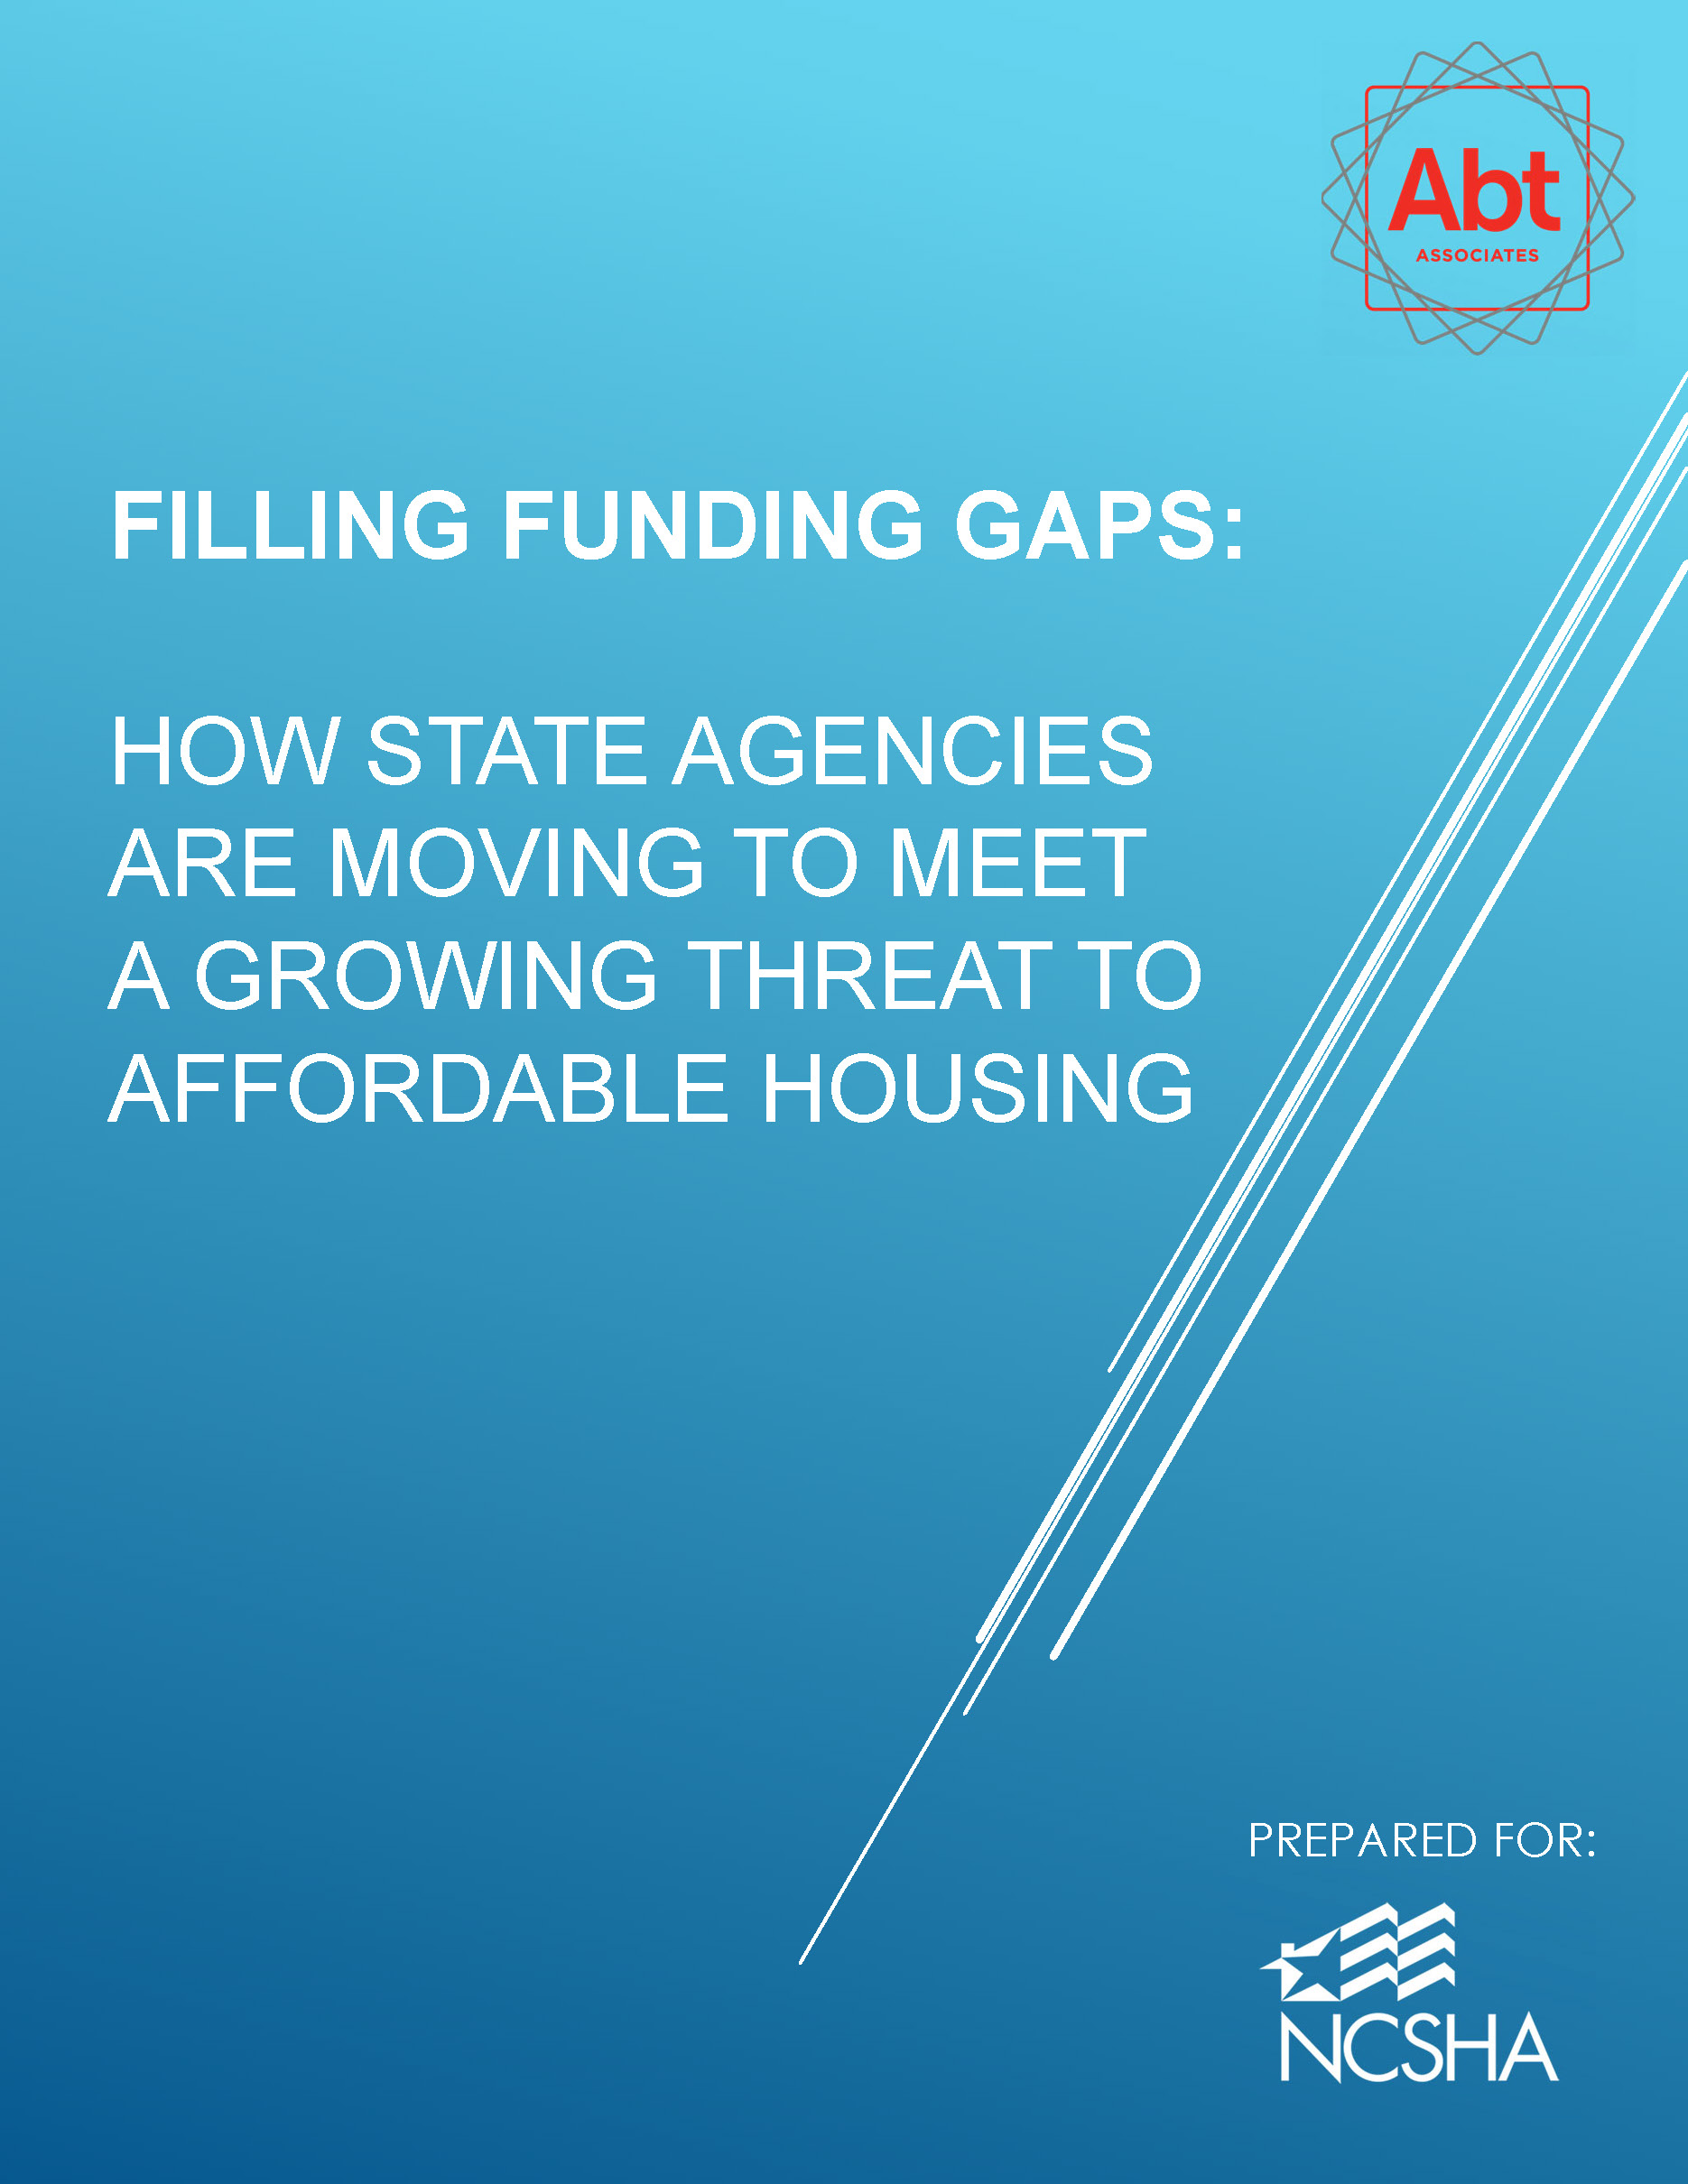 Report: Filling Funding Gaps — How State Agencies Are Moving to Meet a Growing Threat to Affordable Housing